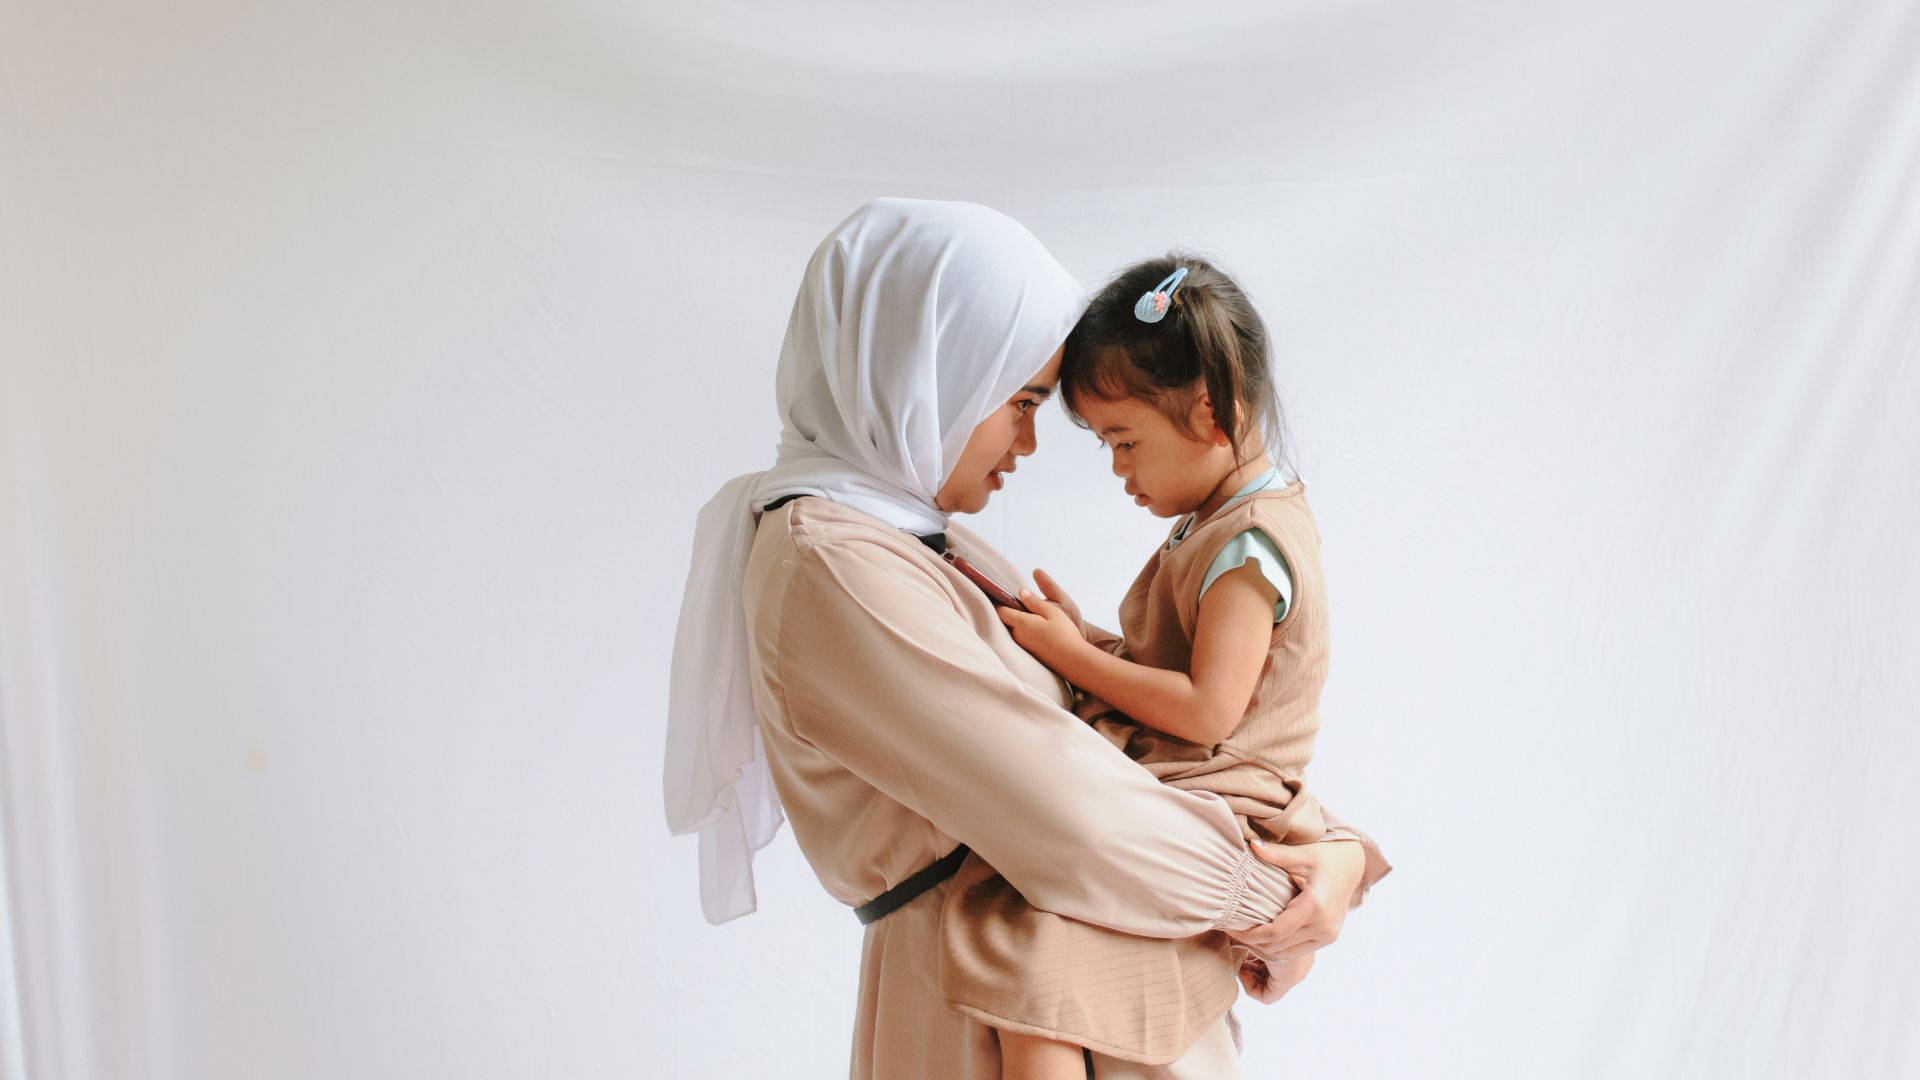 Caption: A Warm Embrace - Loving Muslim Mother Carrying Her Child